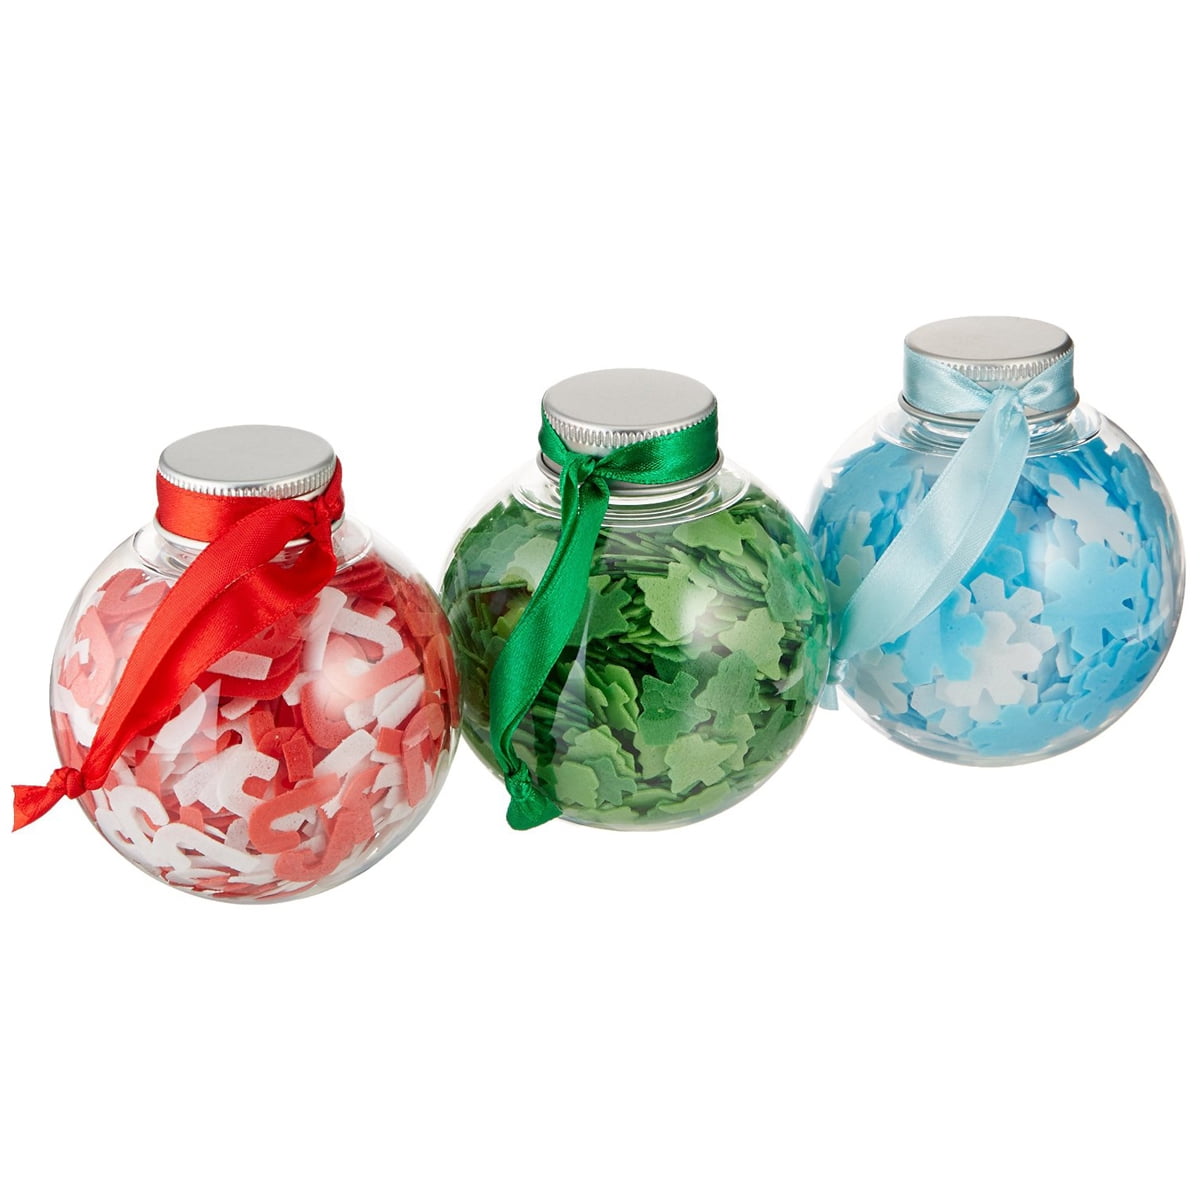 Camouflage Flask & Shot Glasses in Case Christmas Ornament by Hallmark 